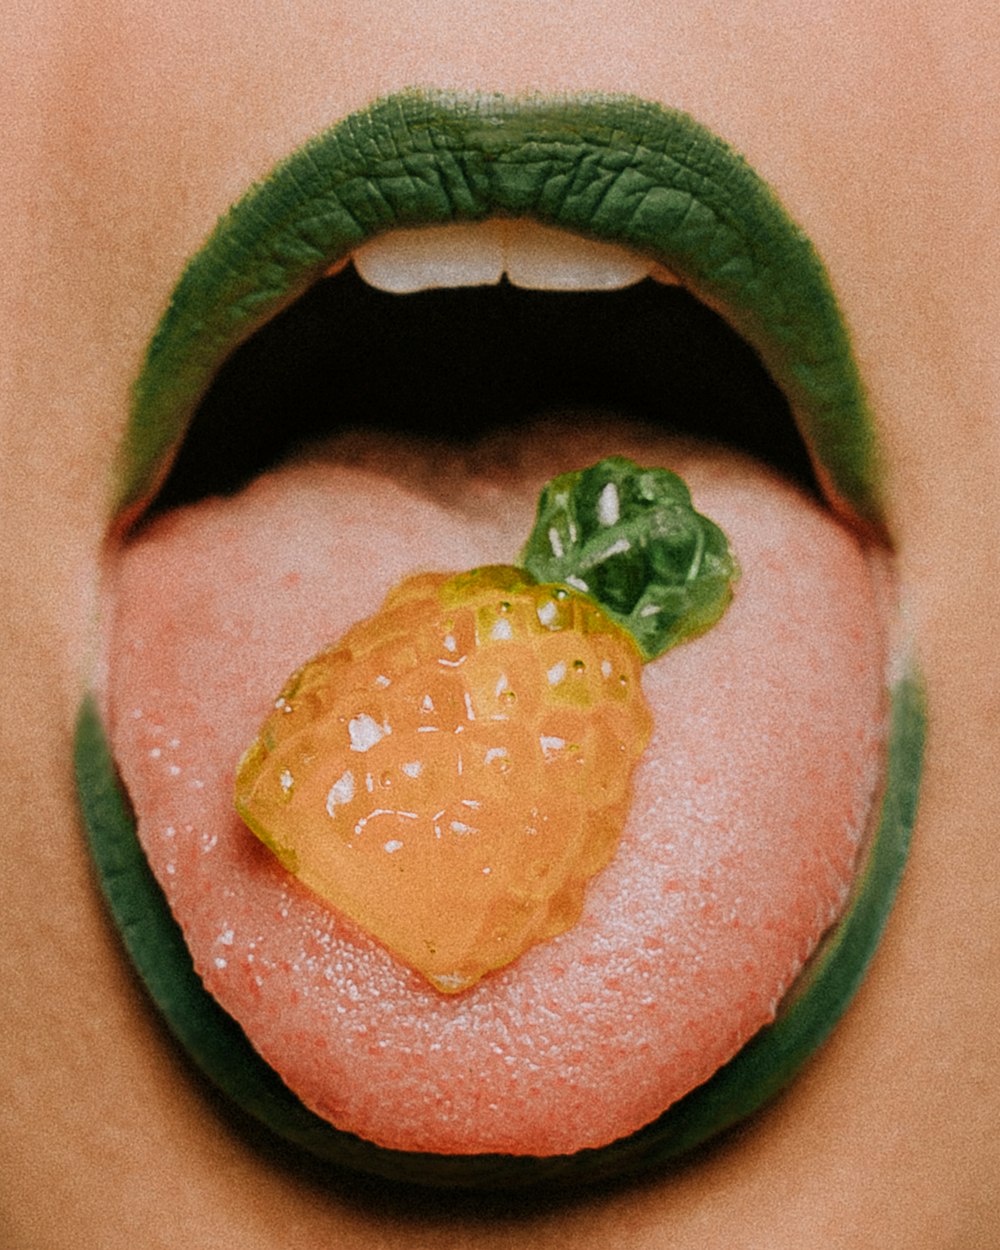 person showing tongue with pineapple candy